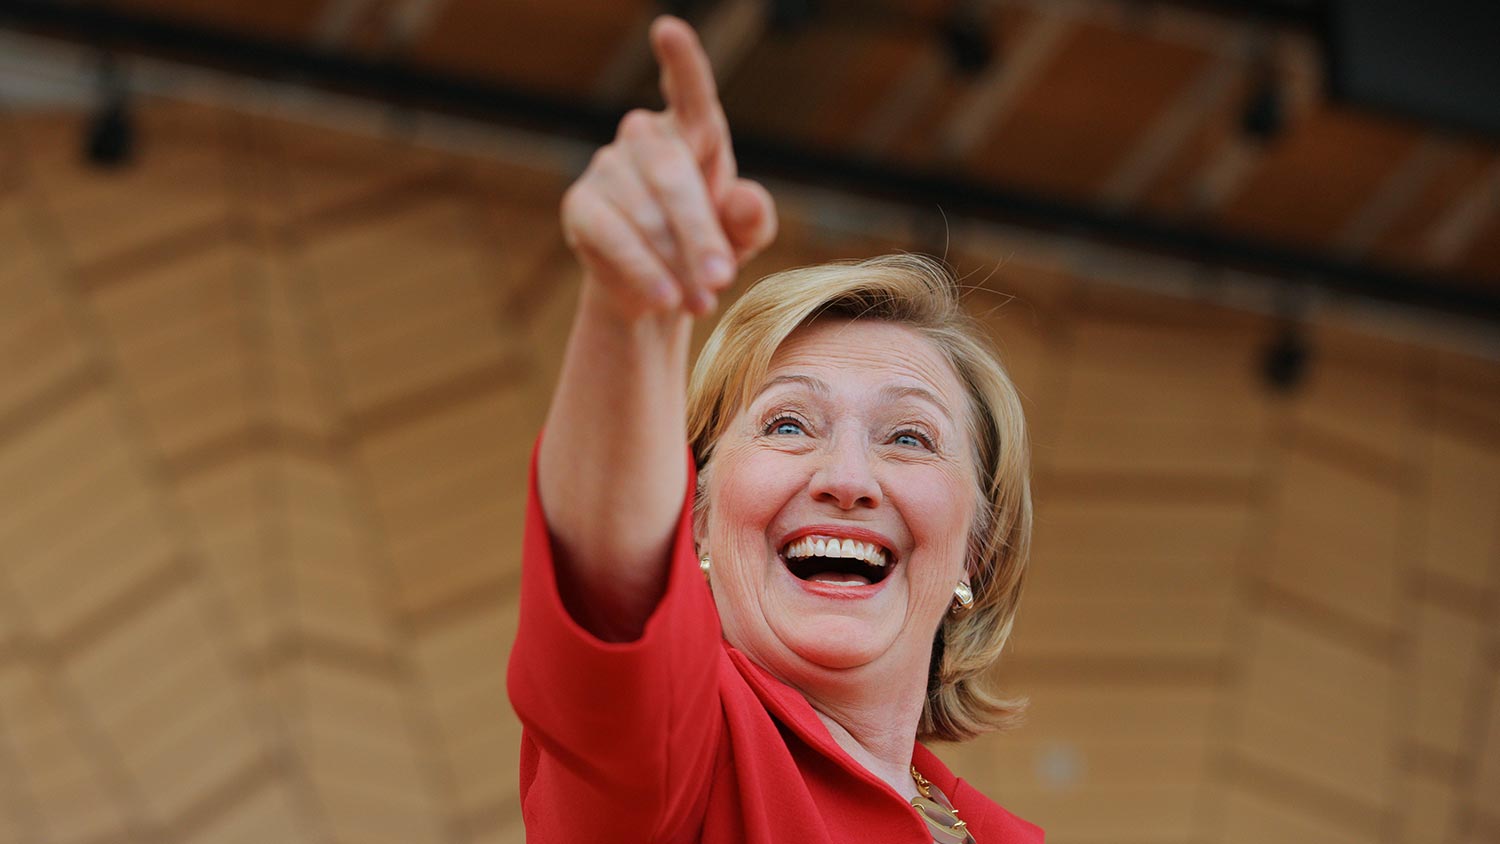 Hillary Clinton, former U.S. secretary of state, gestures before speaking at the Aspen Ideas Festival in Aspen, Colorado, U.S., on Monday, June 30, 2014. The
